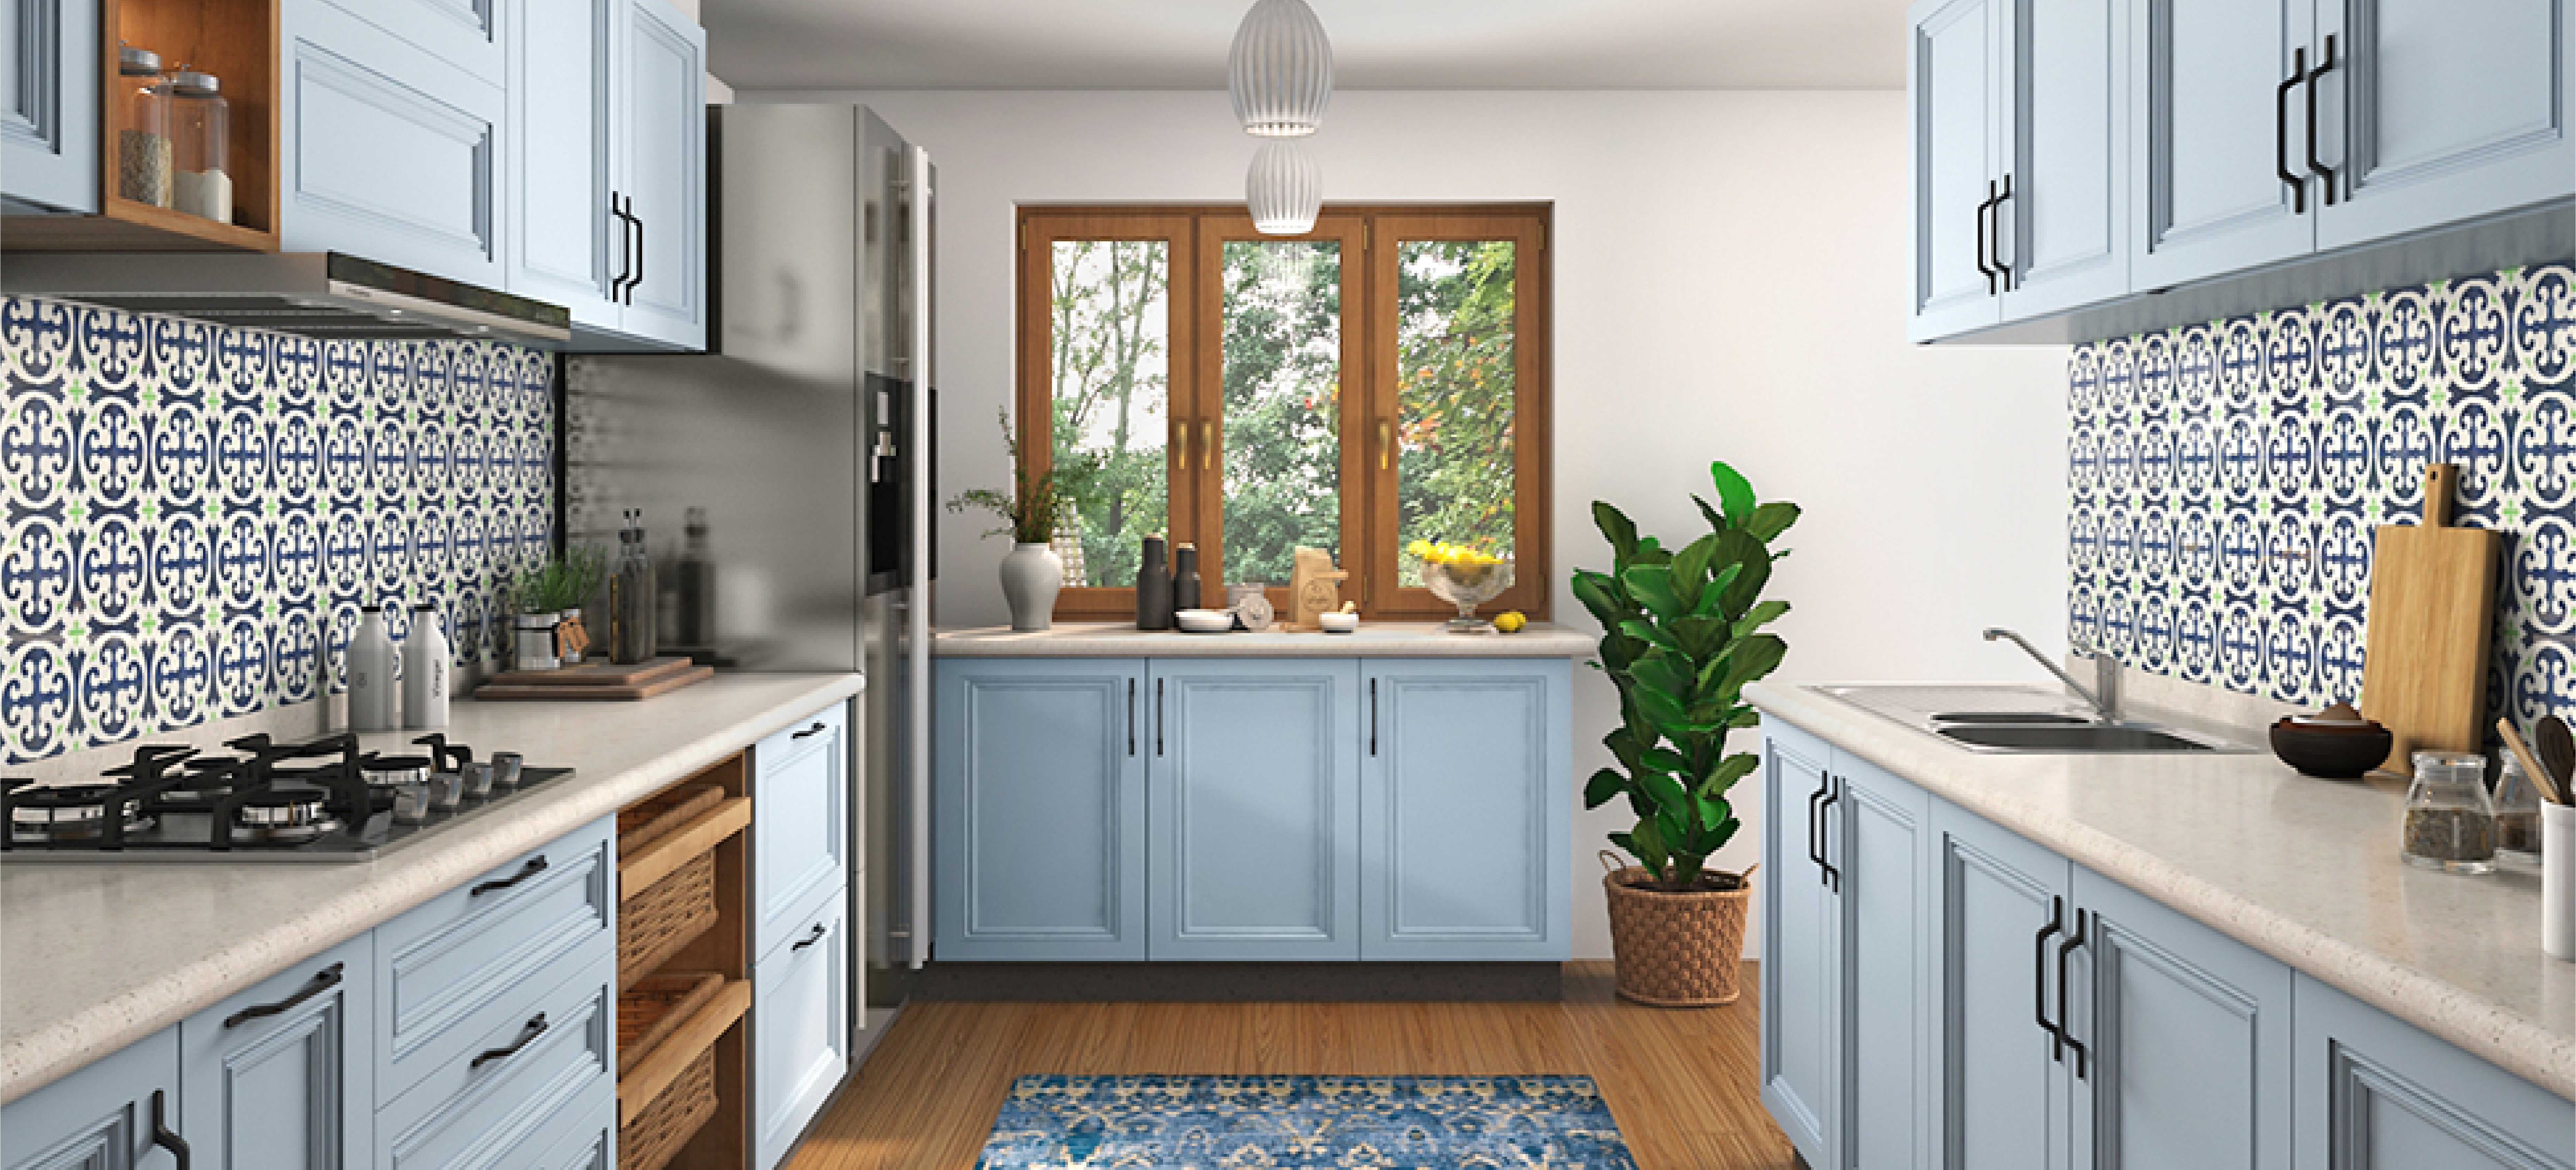 https://www.ulcdn.net/media/collection%20and%20listing/Parallel_Shaped_Kitchen_Layout.jpg?1690529965